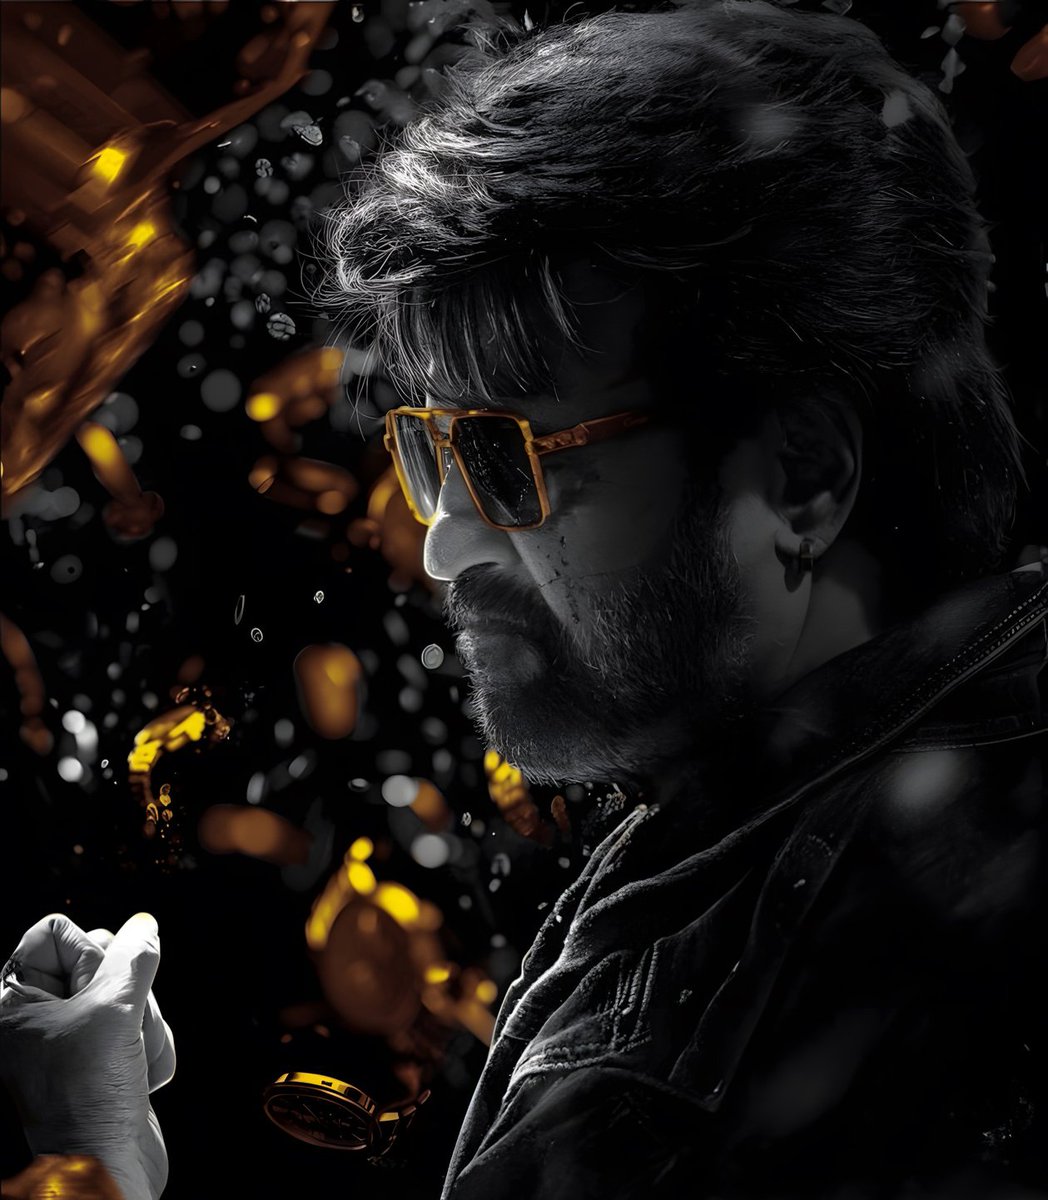 #Coolie title teaser has surpassed 8M views in less than 3 days. Marching towards 10M views and 500K likes 🔥 #CoolieTitleTeaser @rajinikanth